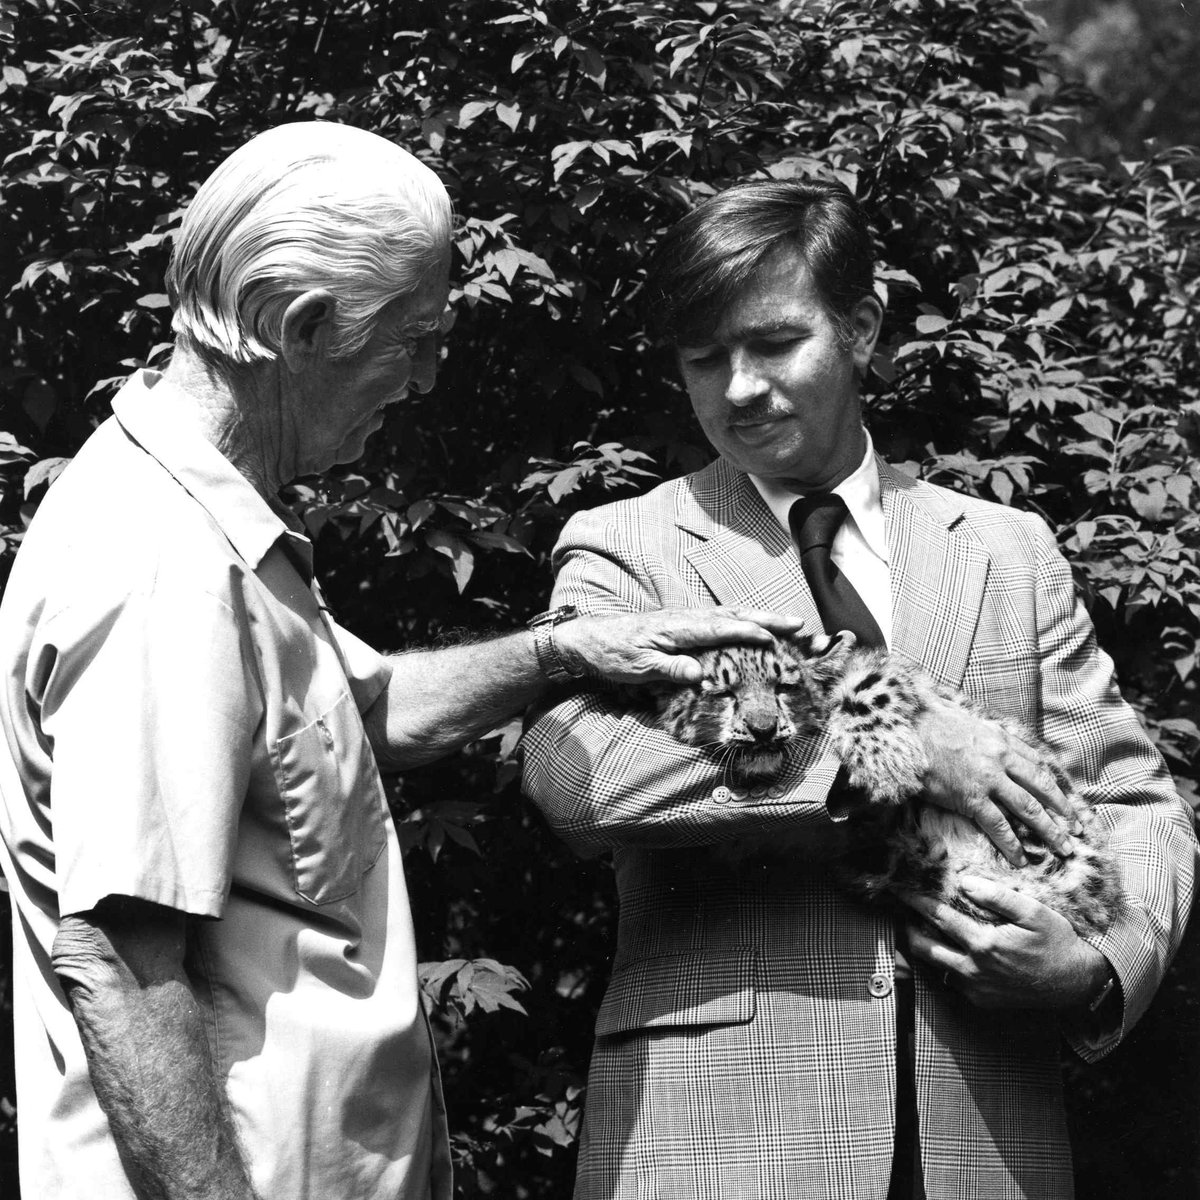 The WCS #Archives is sharing this exciting news from the zoo! Snow leopards have been a part of the @BronxZoo story since 1903. In this archival photo from 1978, @WCS General Director William Conway introduced a young leopard to Marlin Perkins, host of TV’s “Wild Kingdom.”